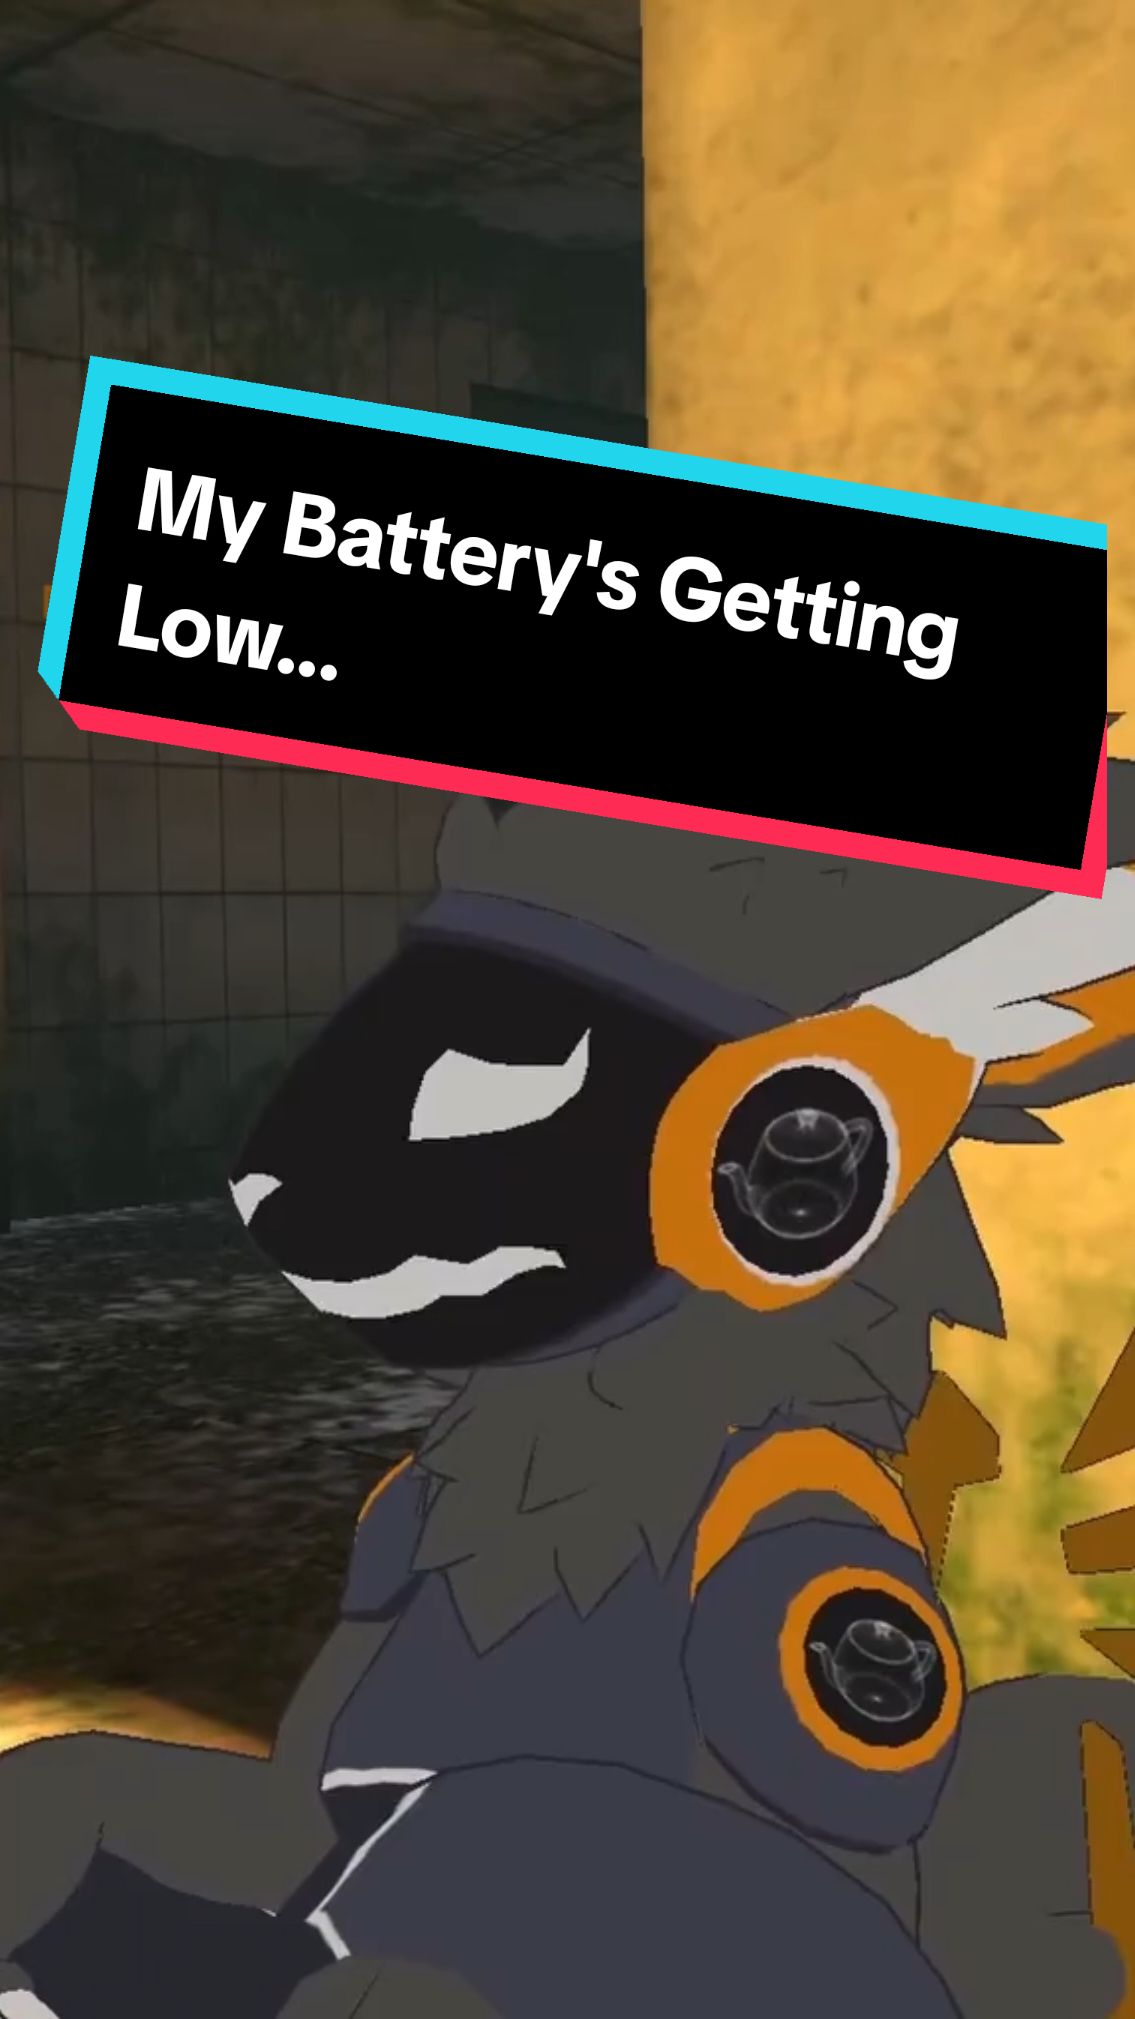 My Battery's Getting Low... Sad proto hours... #vr #vrchatfurry #protogen #sadsong #sadboihour #questpro #content #contentcreators #fy #fyp #foryoupage